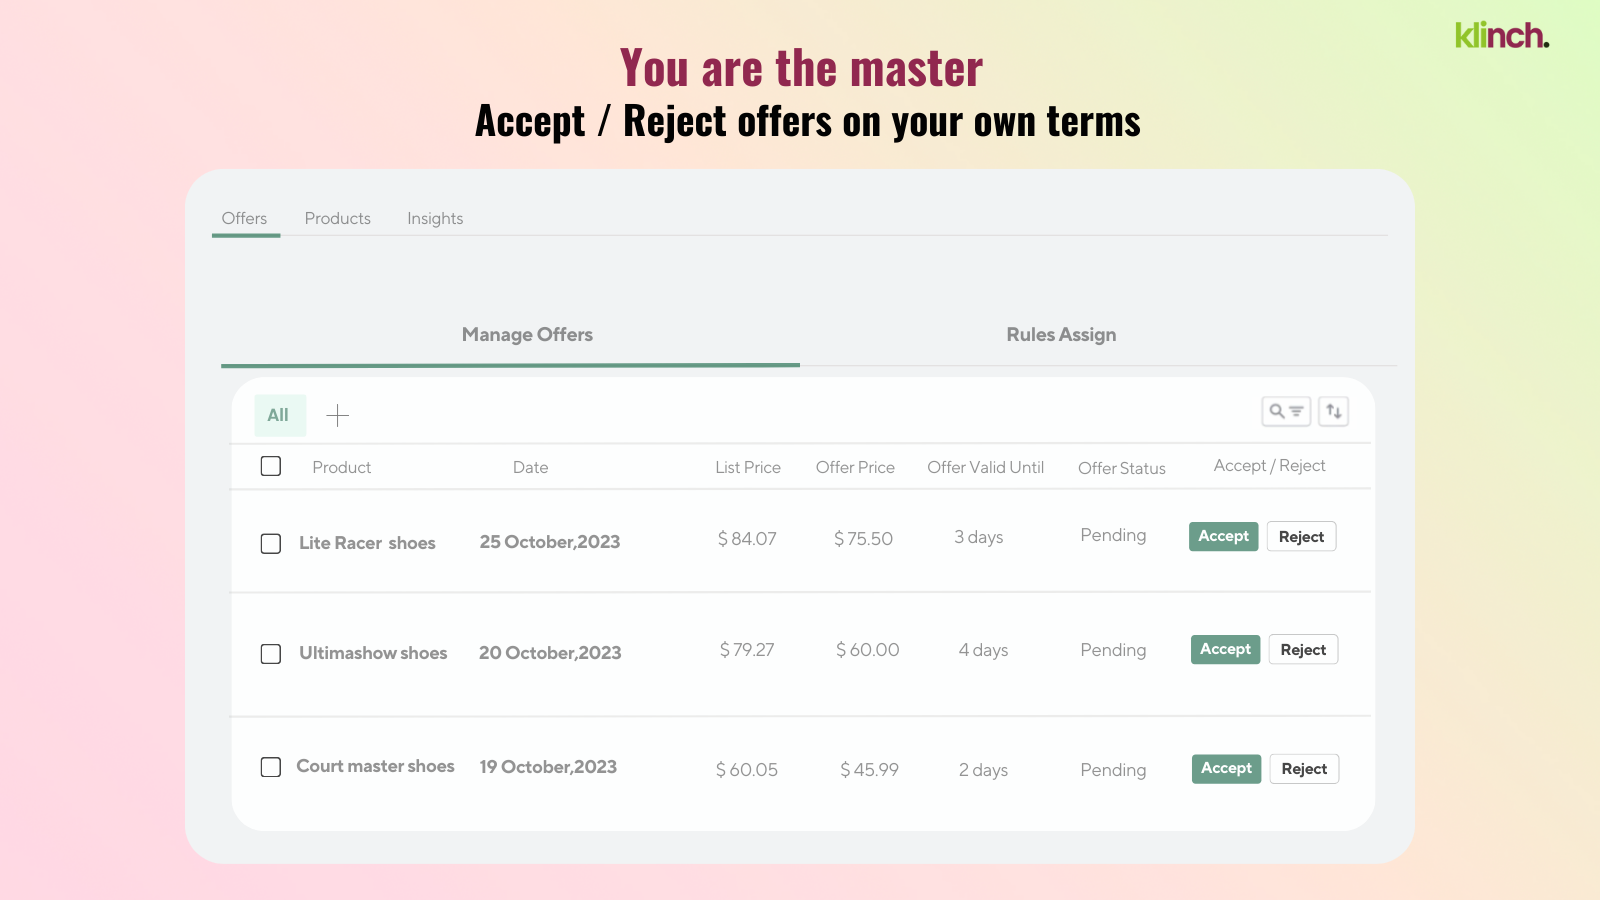 You are the Master: Accept or Reject the offers as your own term